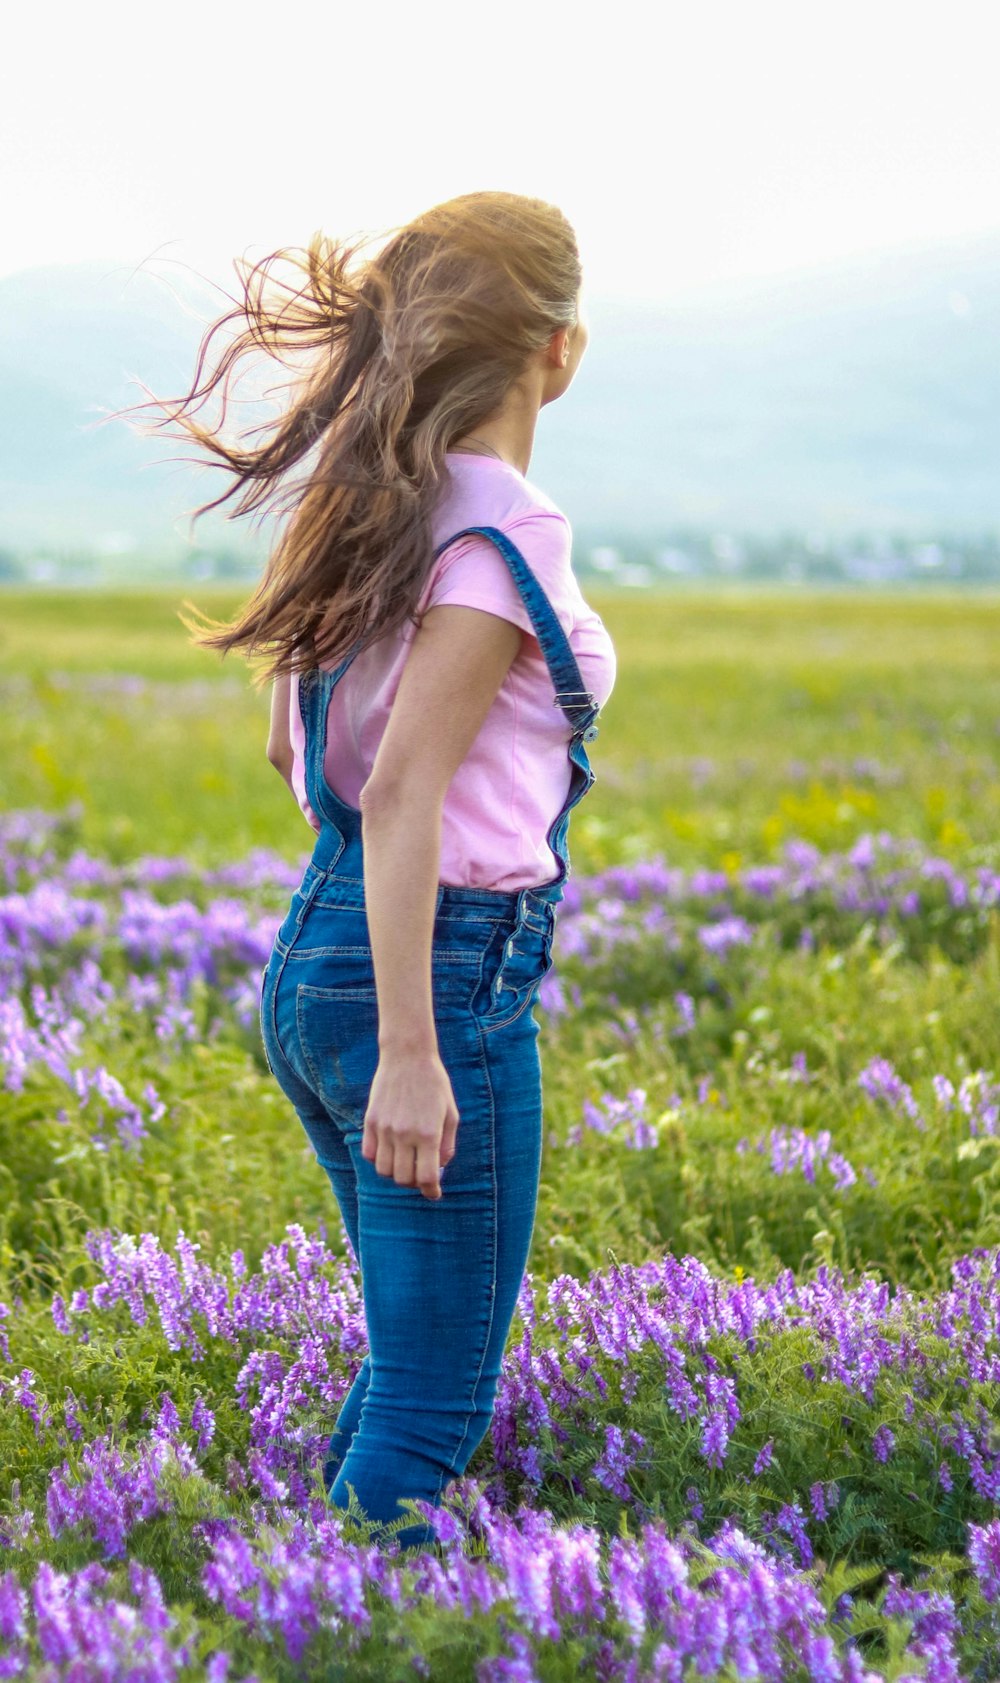 woman in white shirt and blue denim jeans standing on purple flower field during daytime